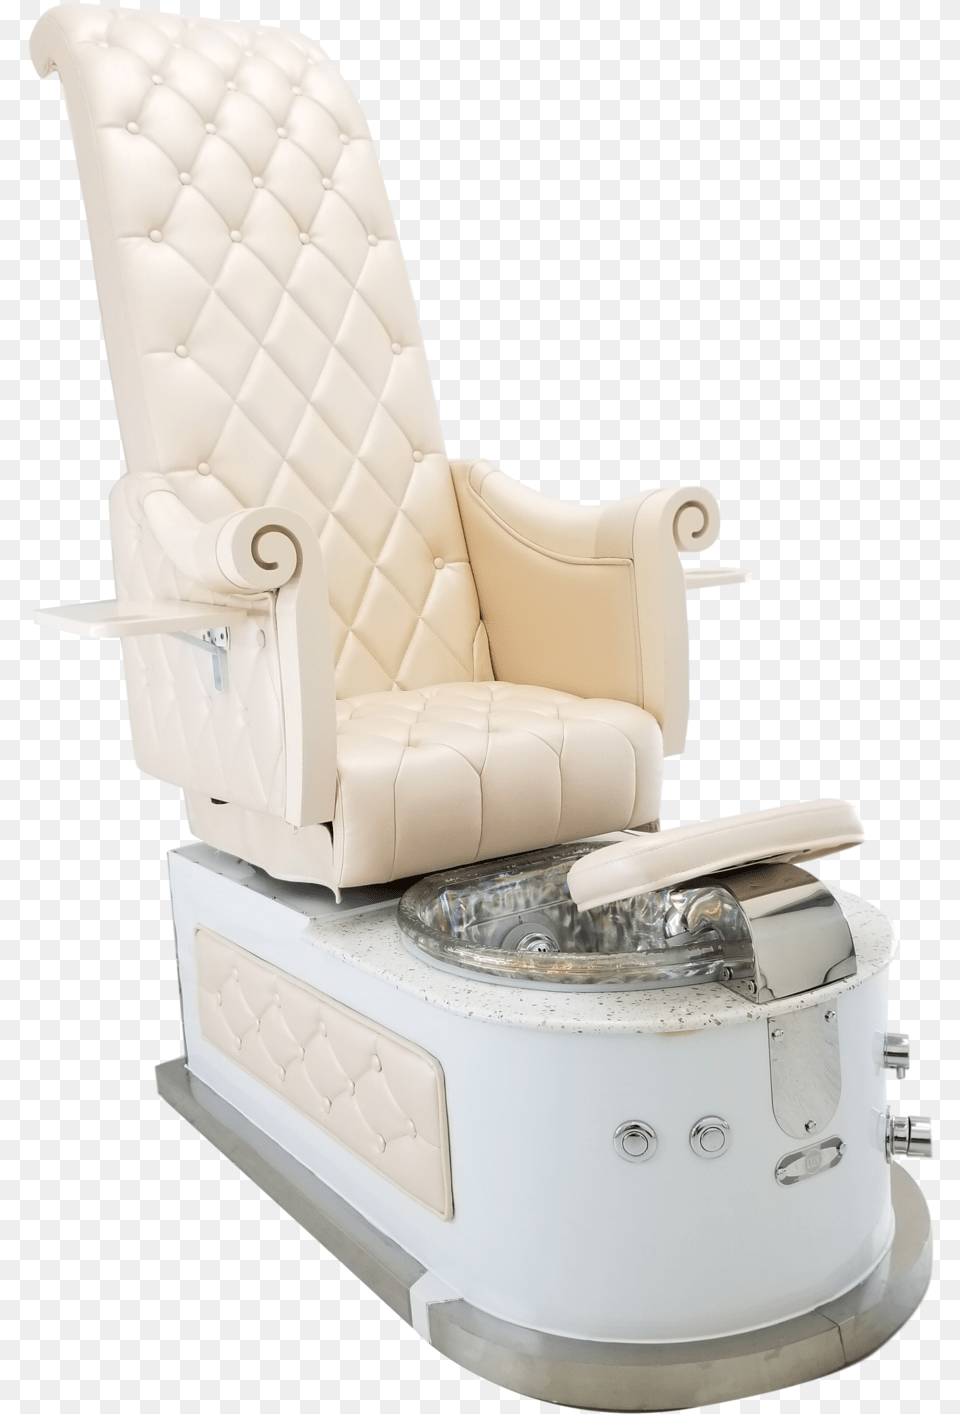 1 Recliner, Furniture, Chair, Cushion, Home Decor Free Transparent Png